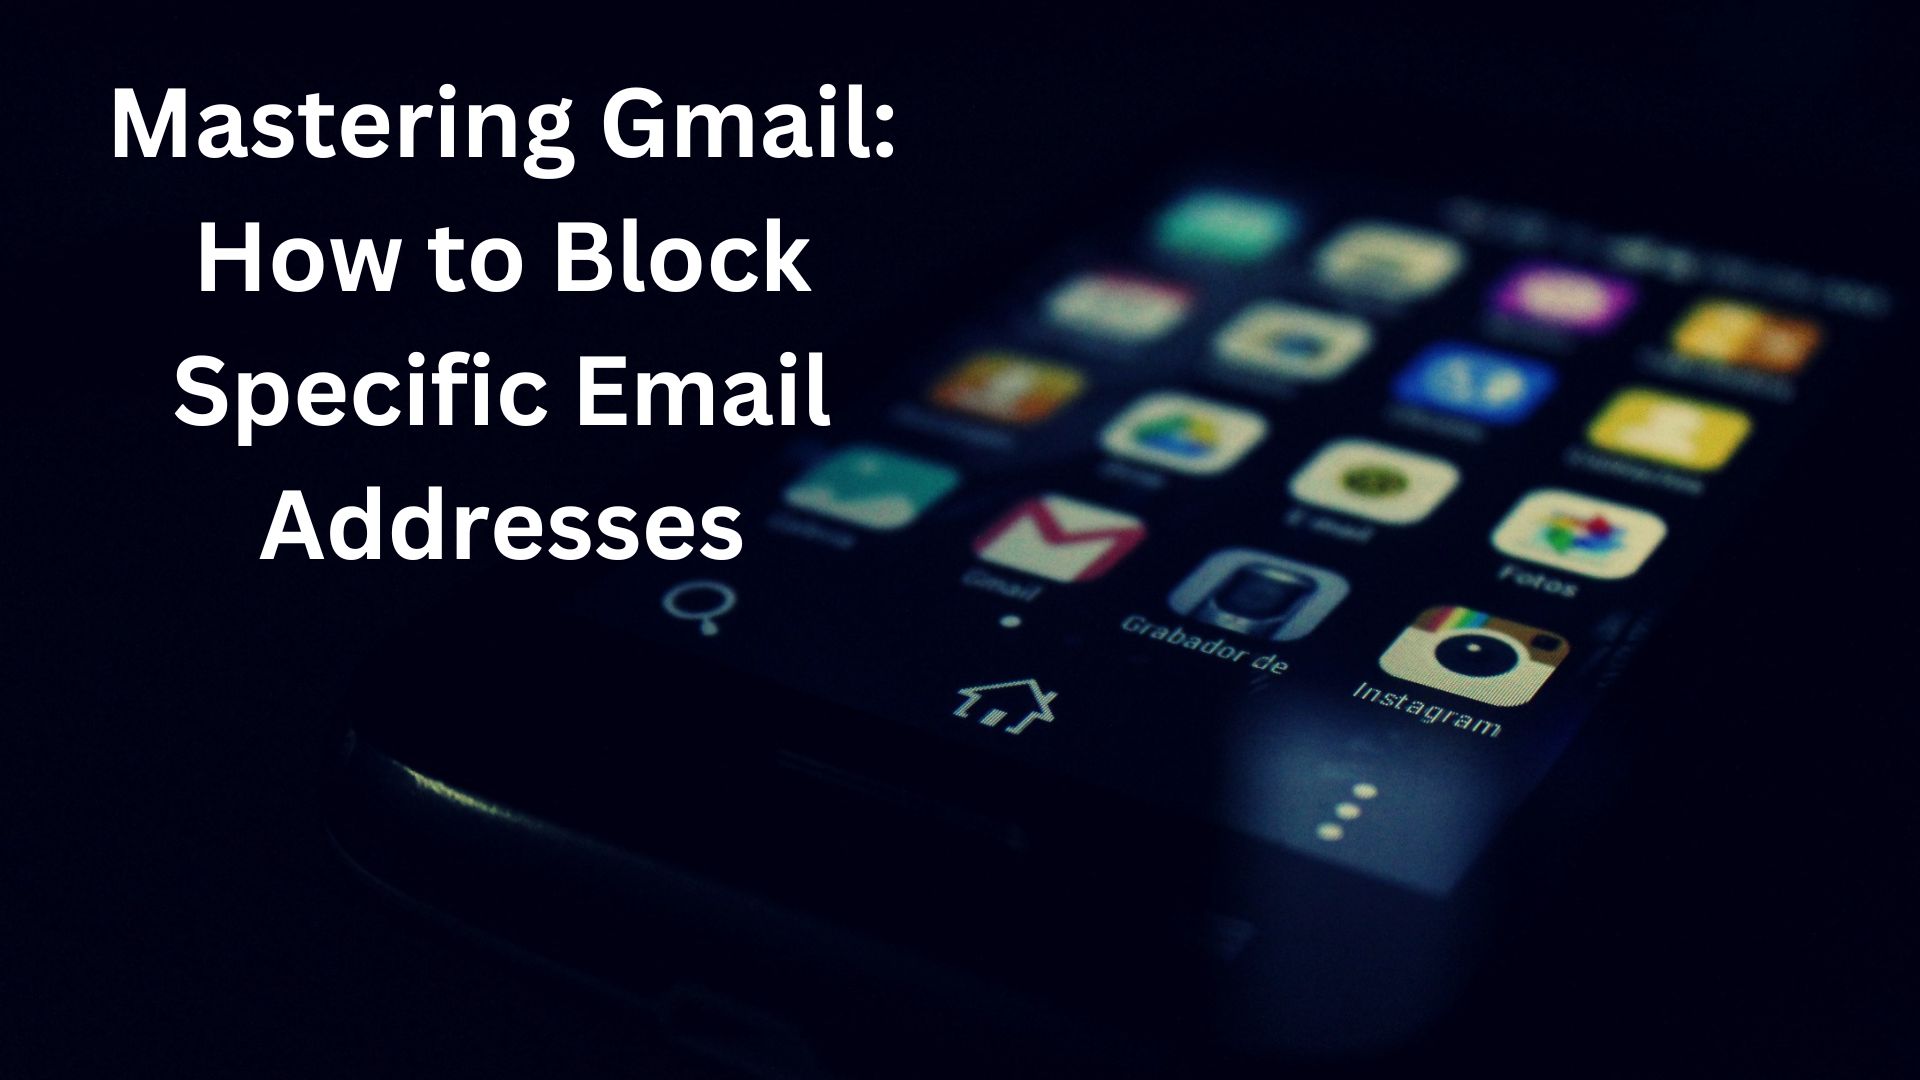 Mastering Gmail: How to Block Specific Email Addresses